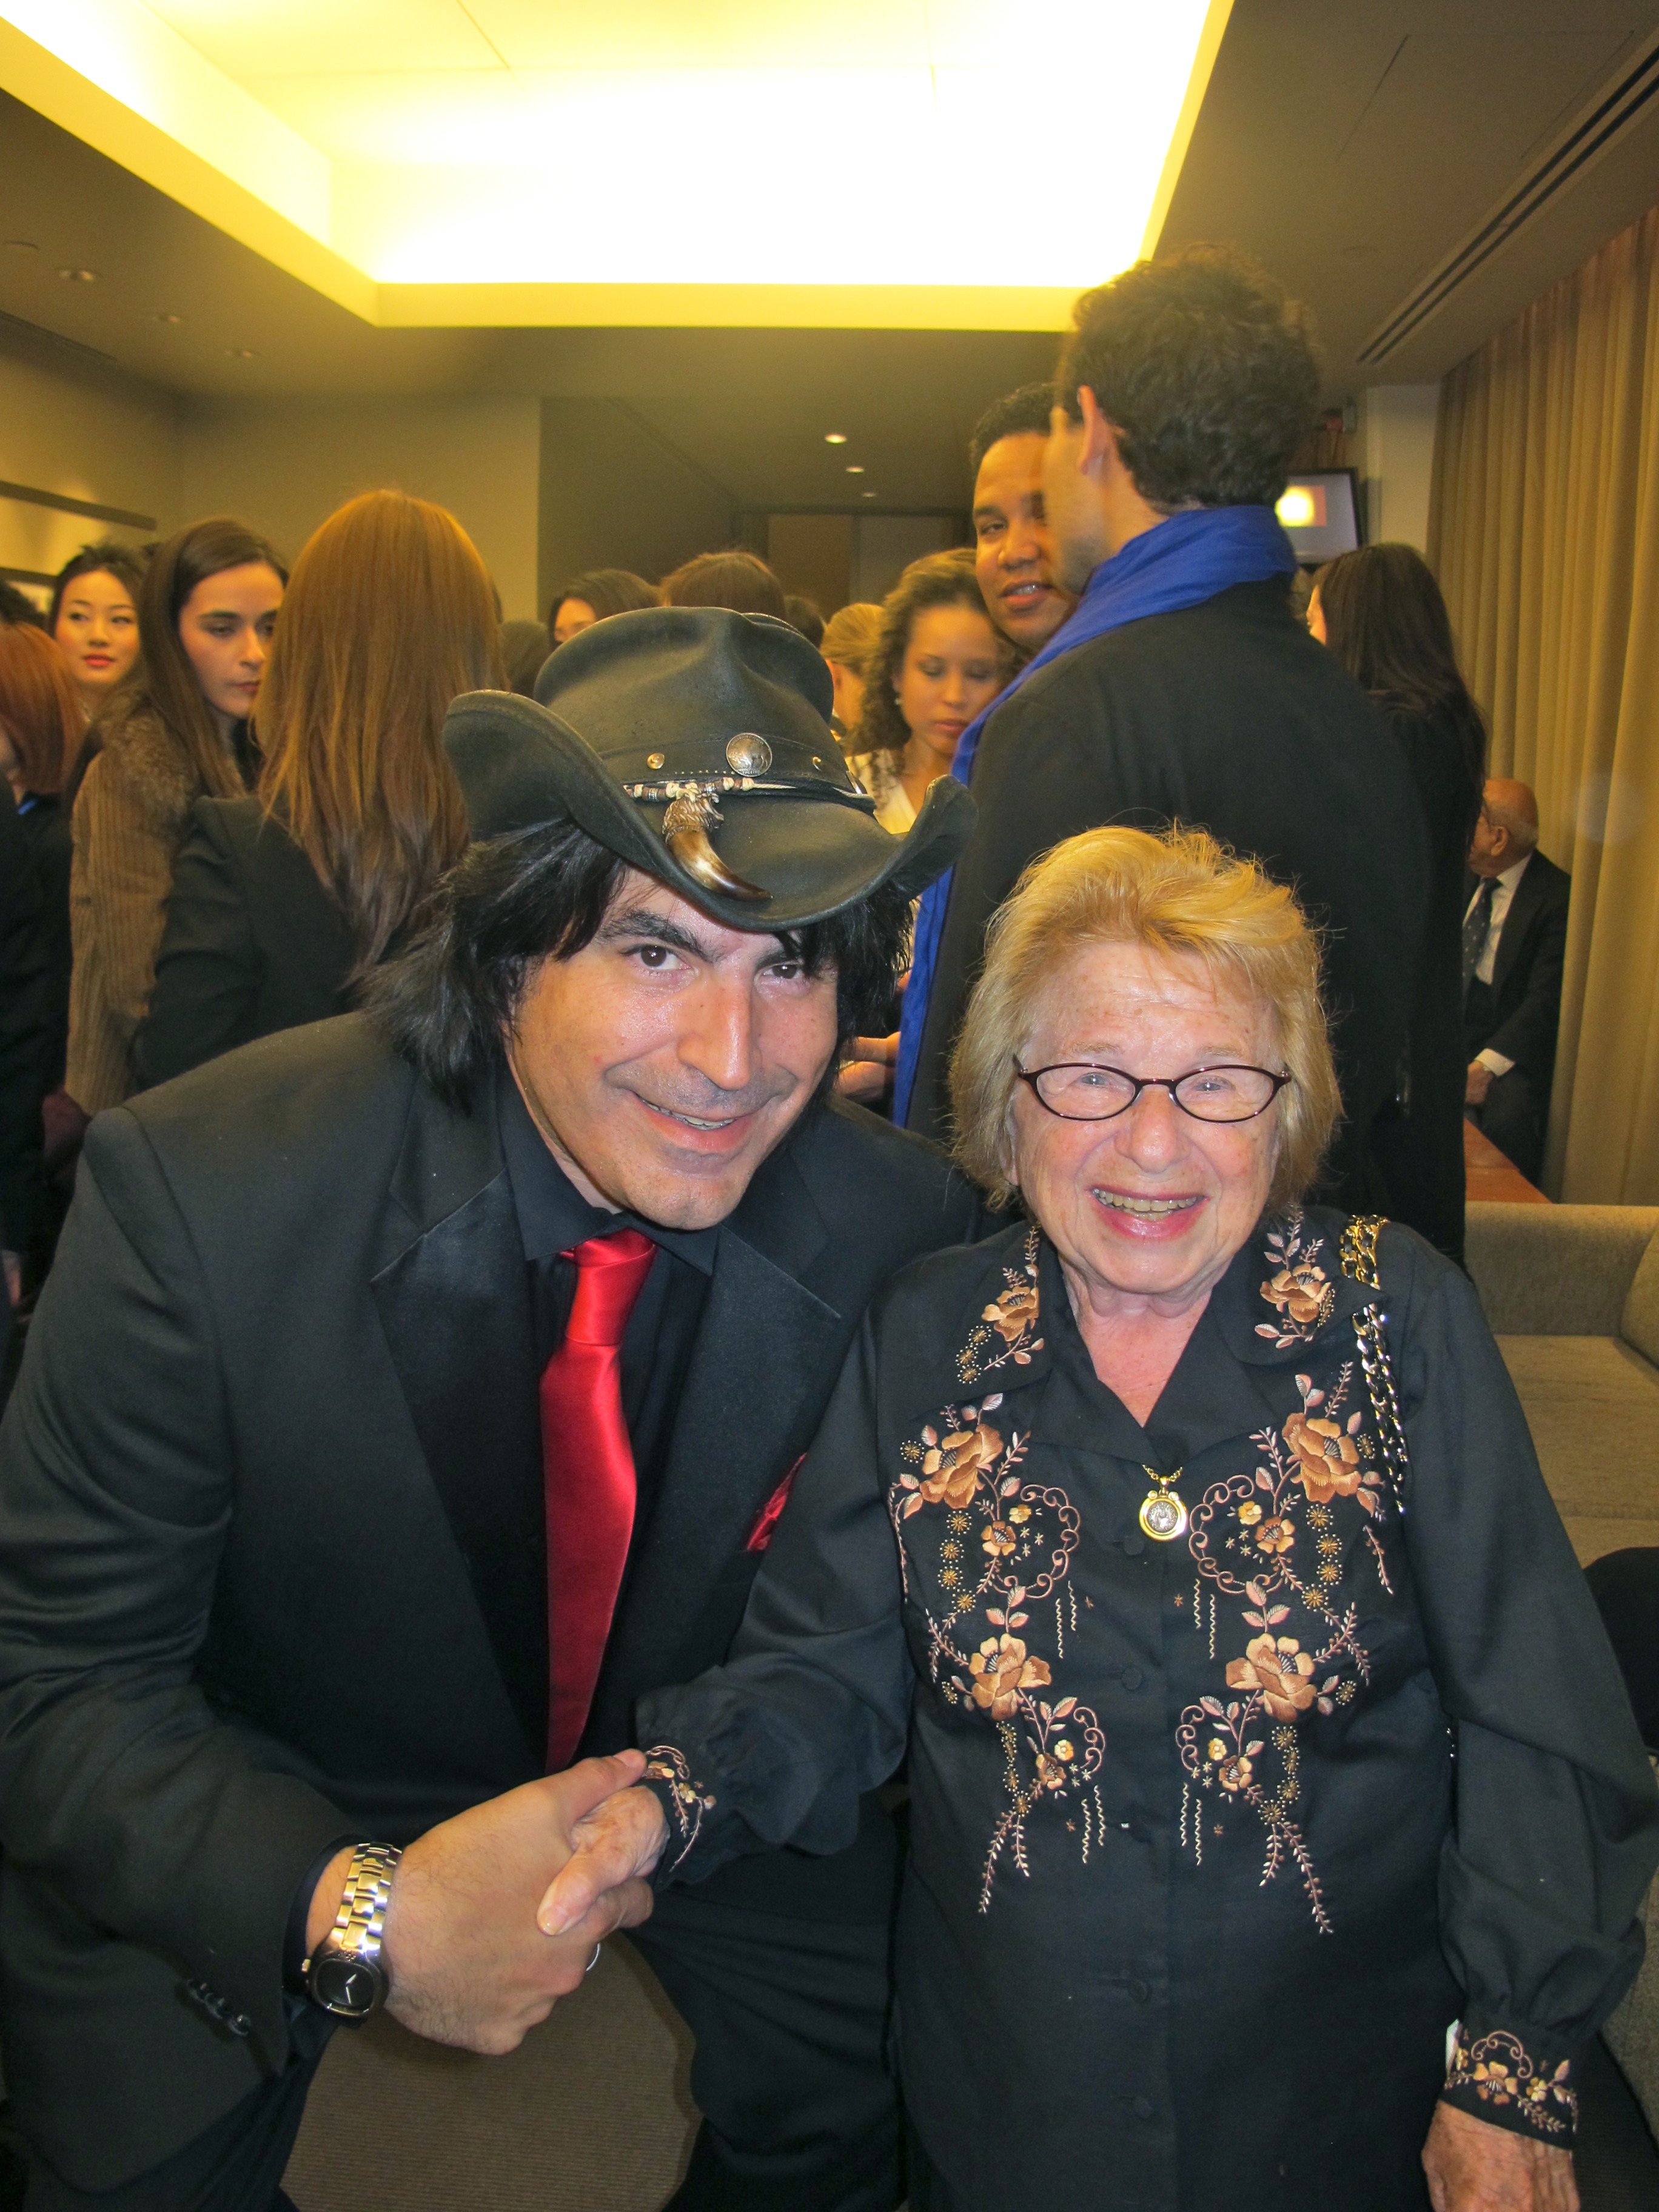 Myself and Dr. Ruth Westheimer at the 